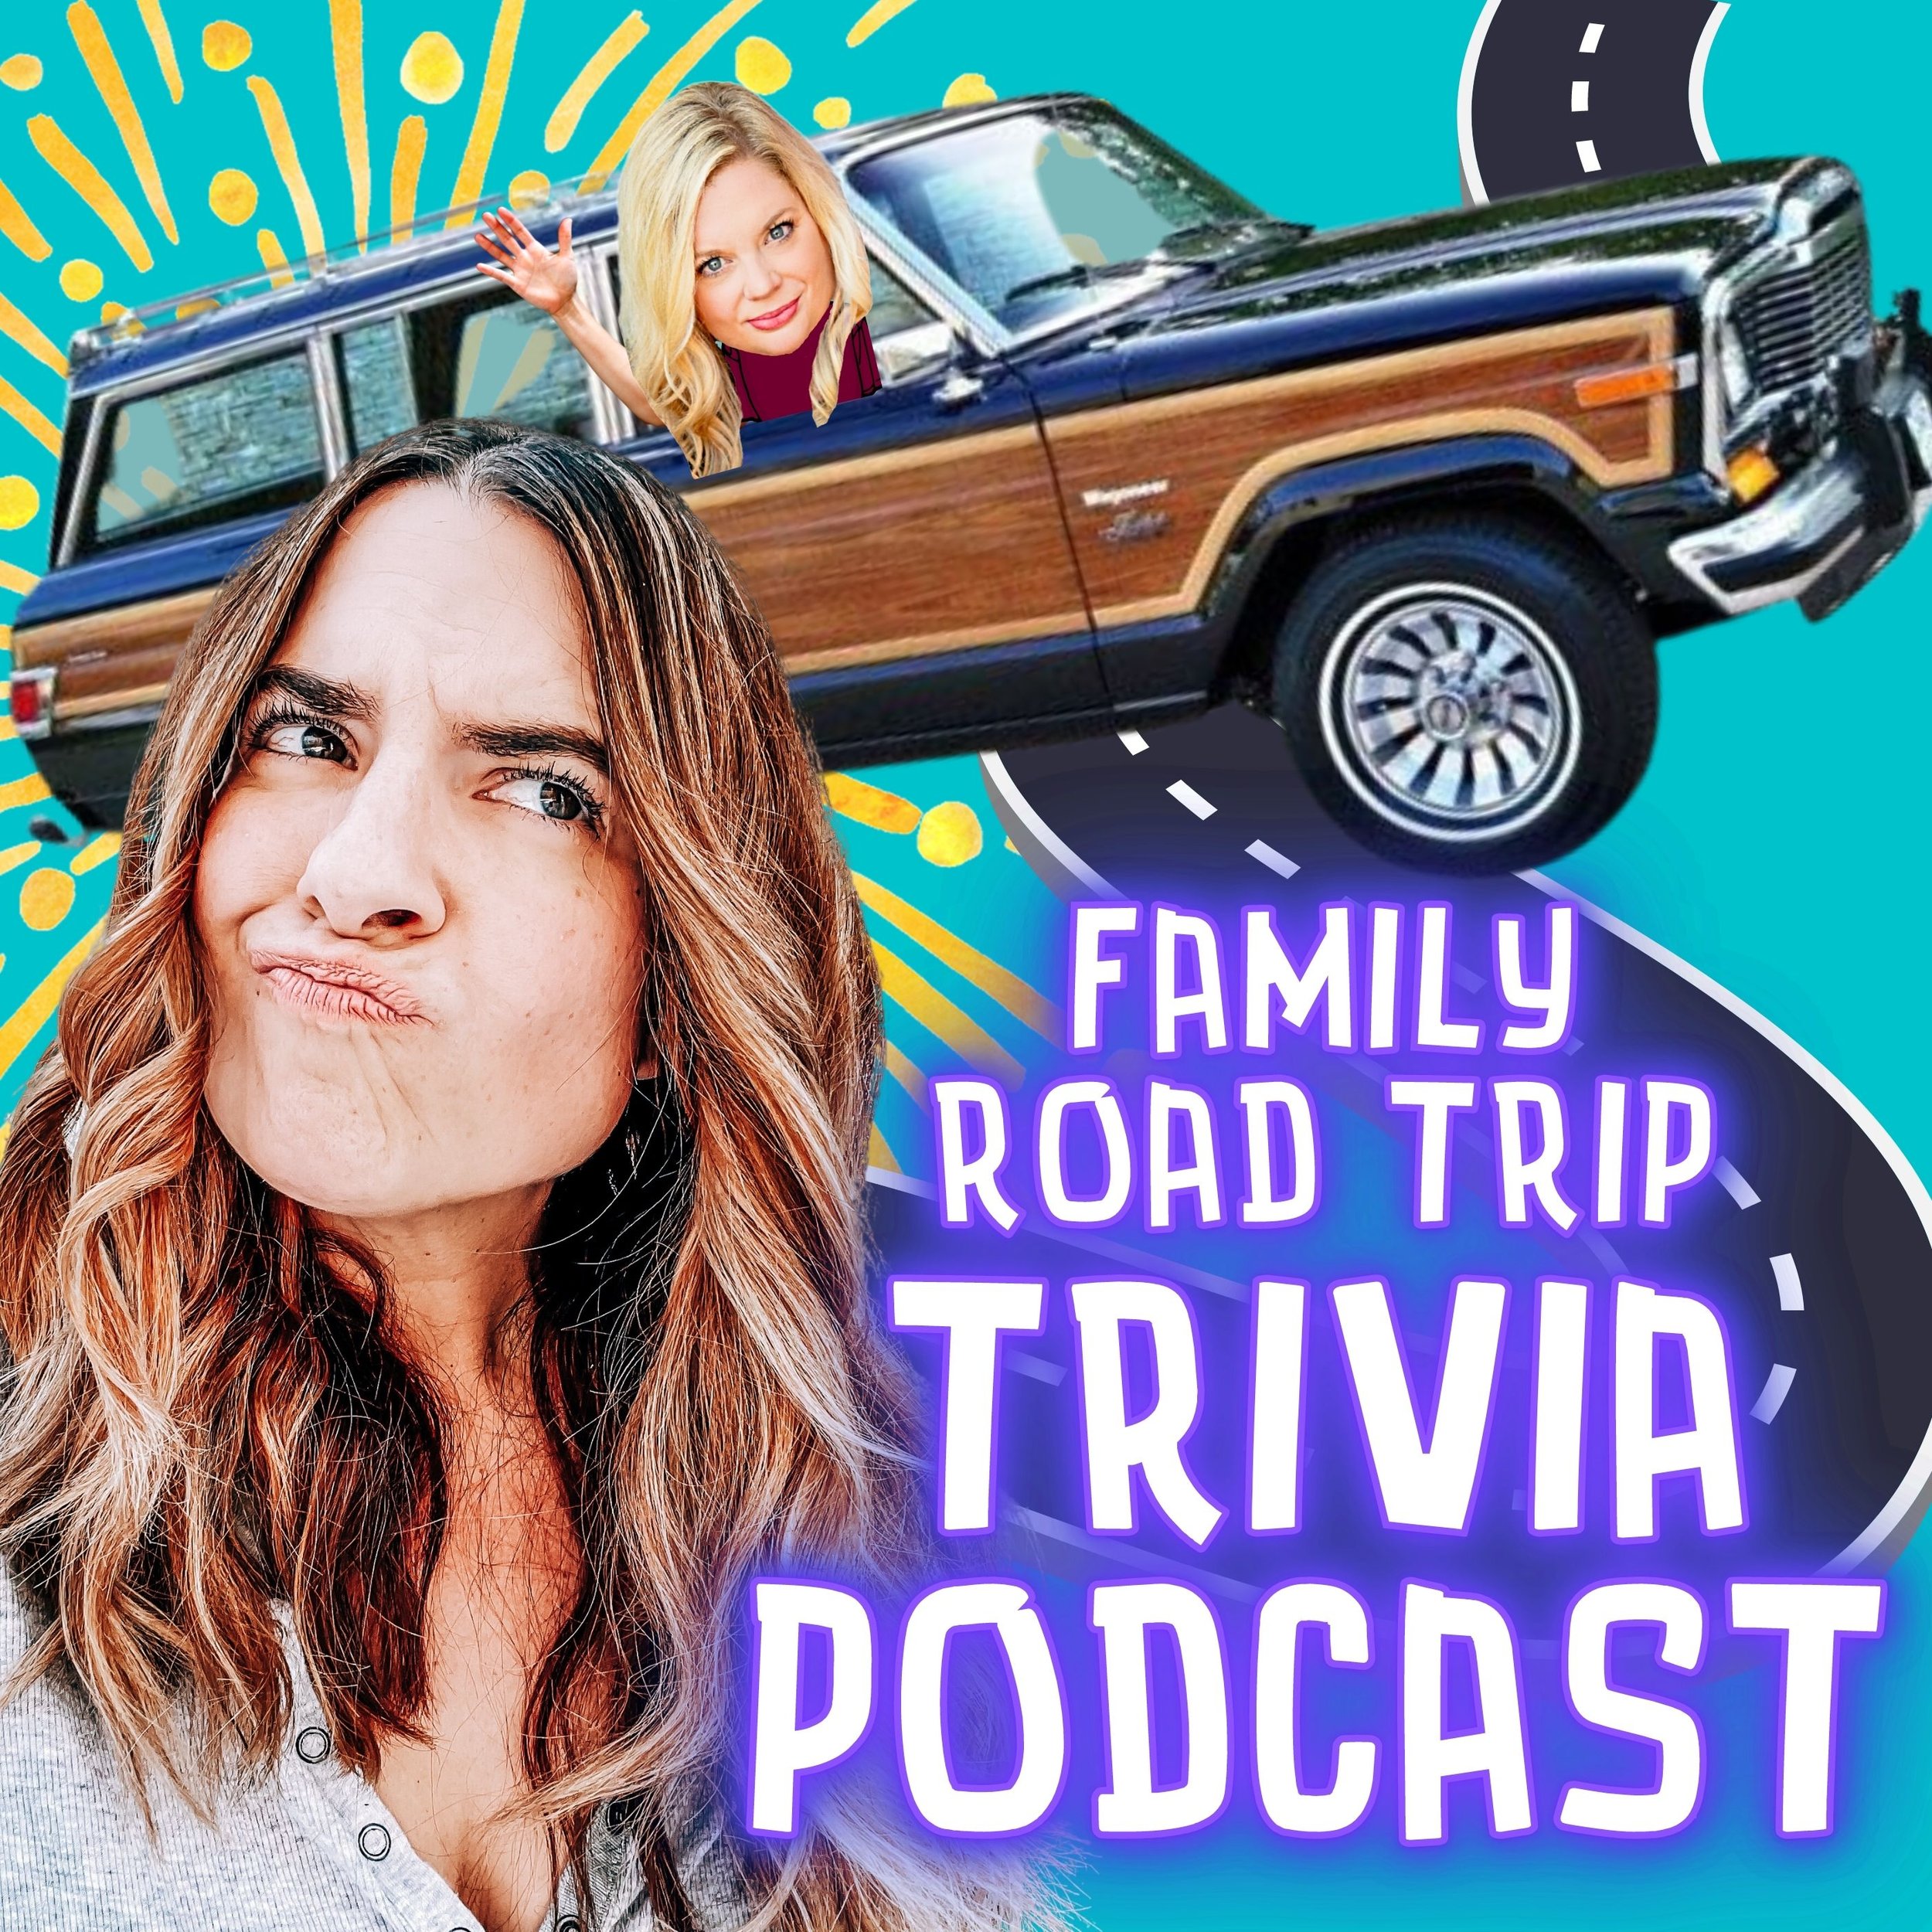 family road trip trivia podcast hosts